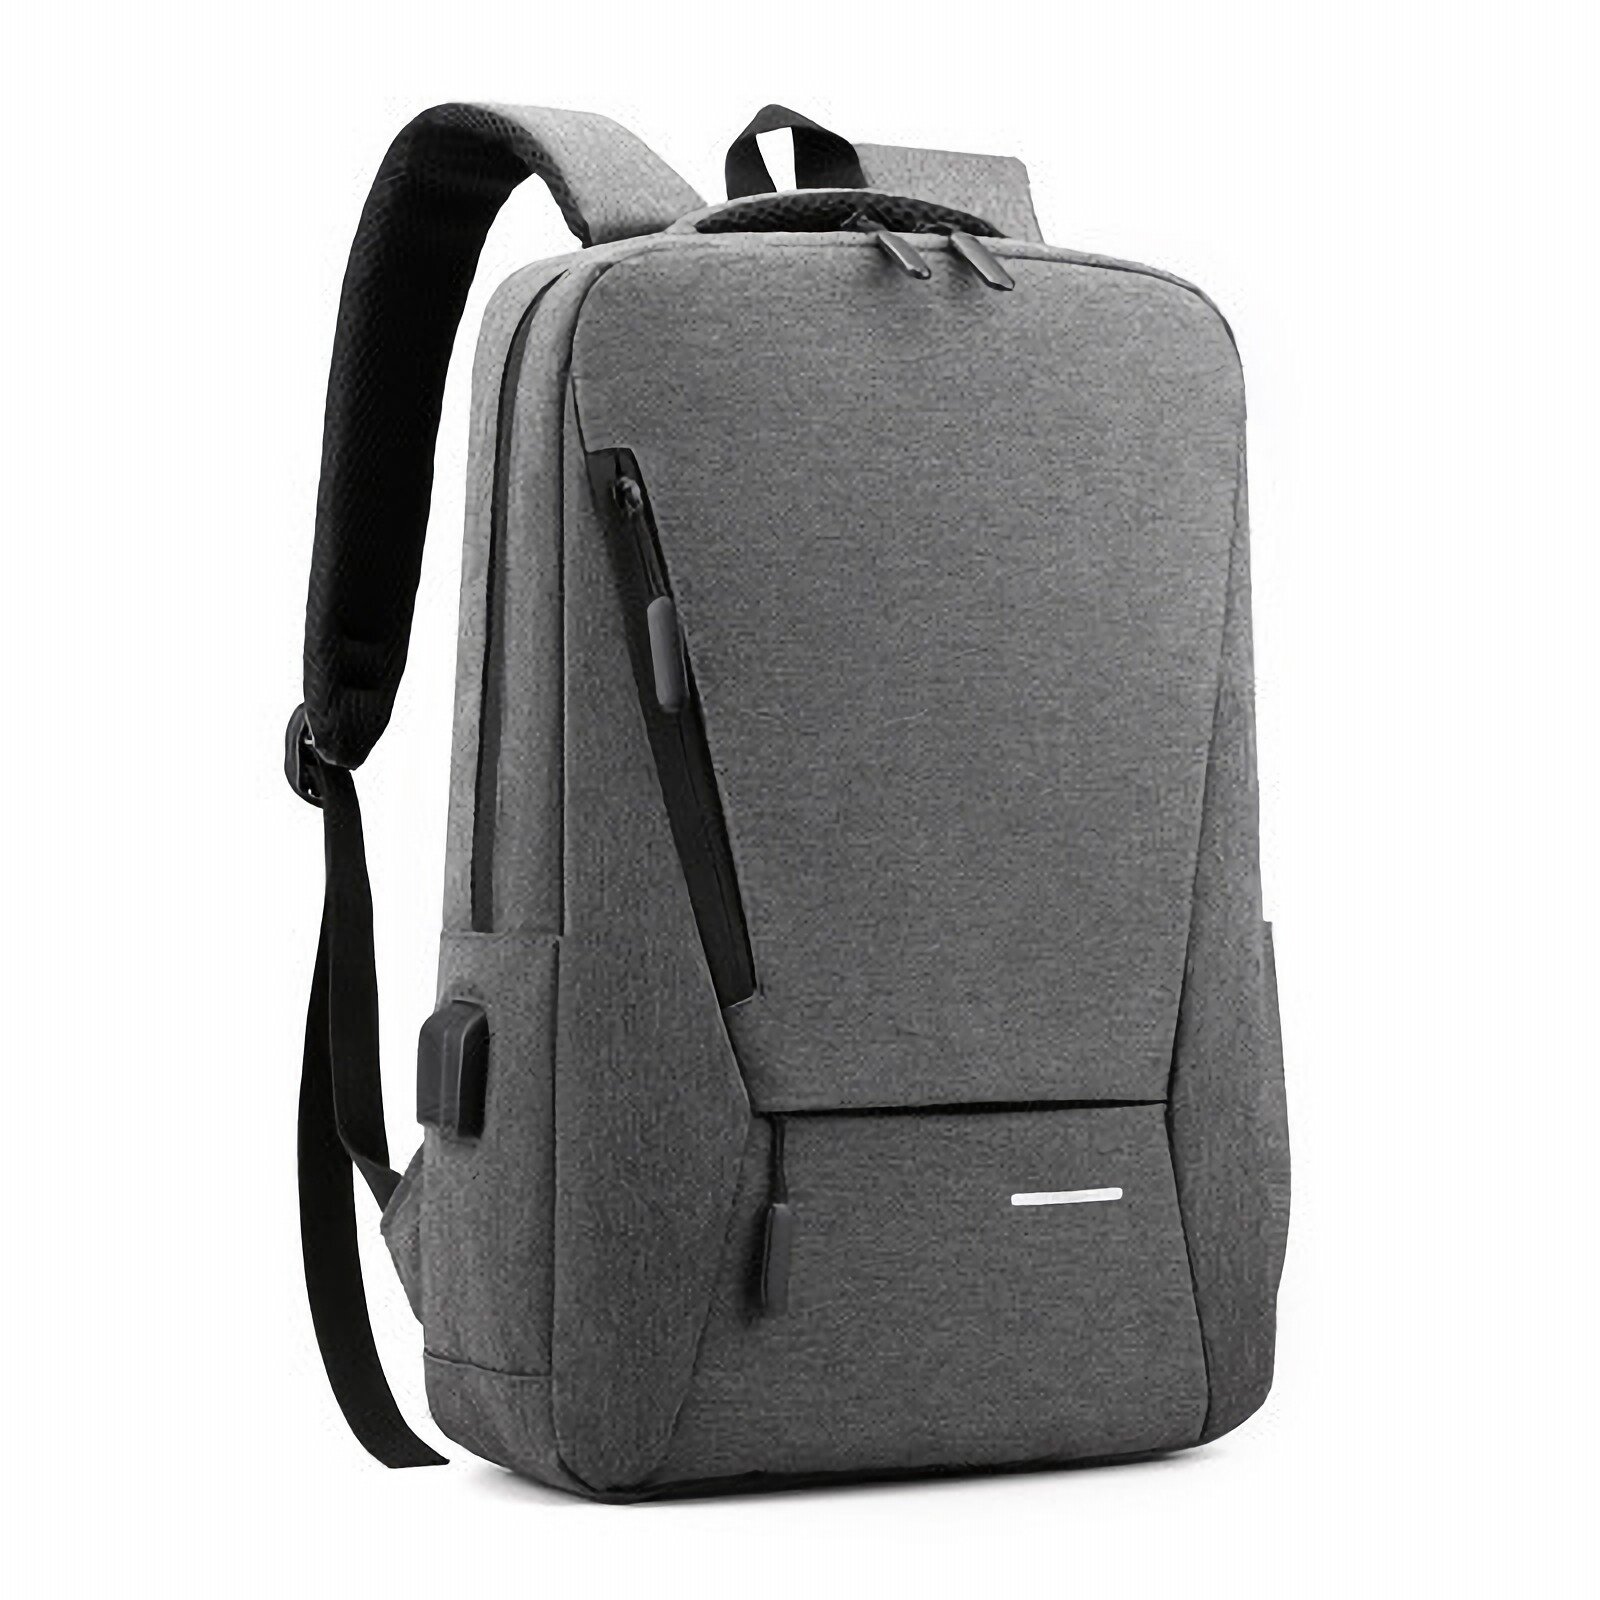 Buy Backpack Business Bags Laptop Bags Overnight Bags Stock For Sale Online At 0 00 Price Thaitrade Com